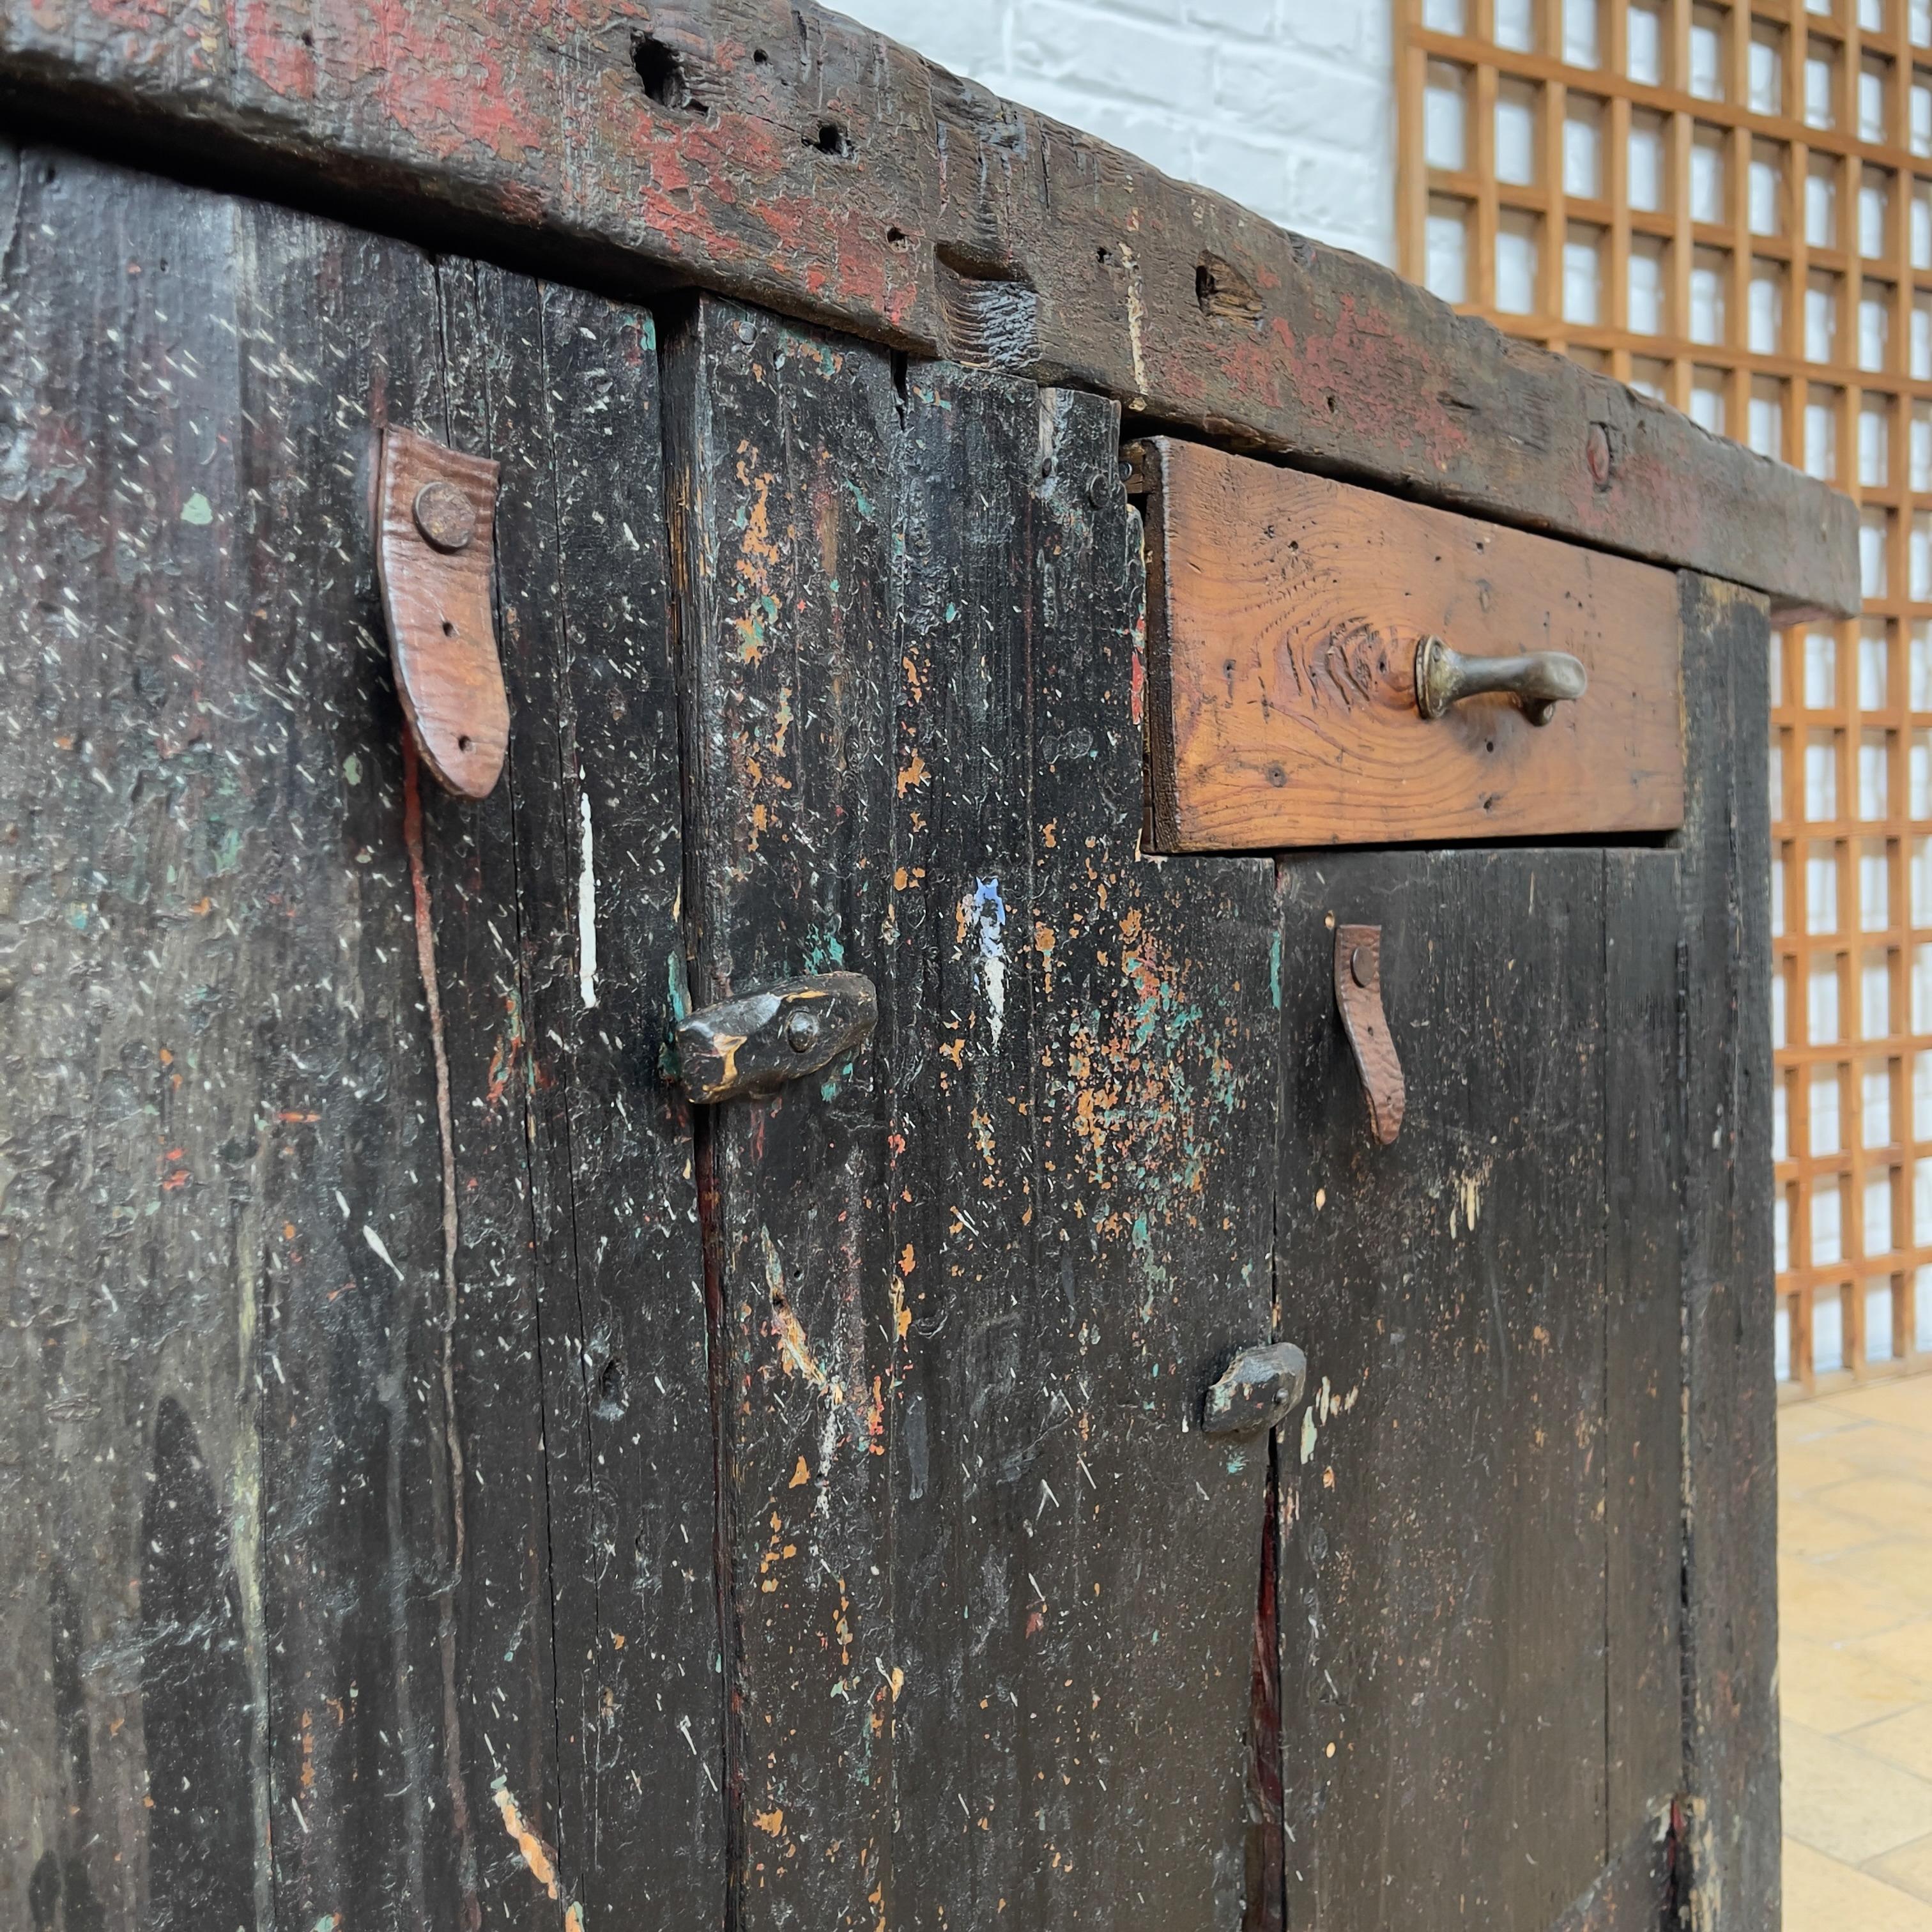 Wooden french workbench from c.1930
Original patina preserved and protected.
2 doors + 1 drawer
Good condition.